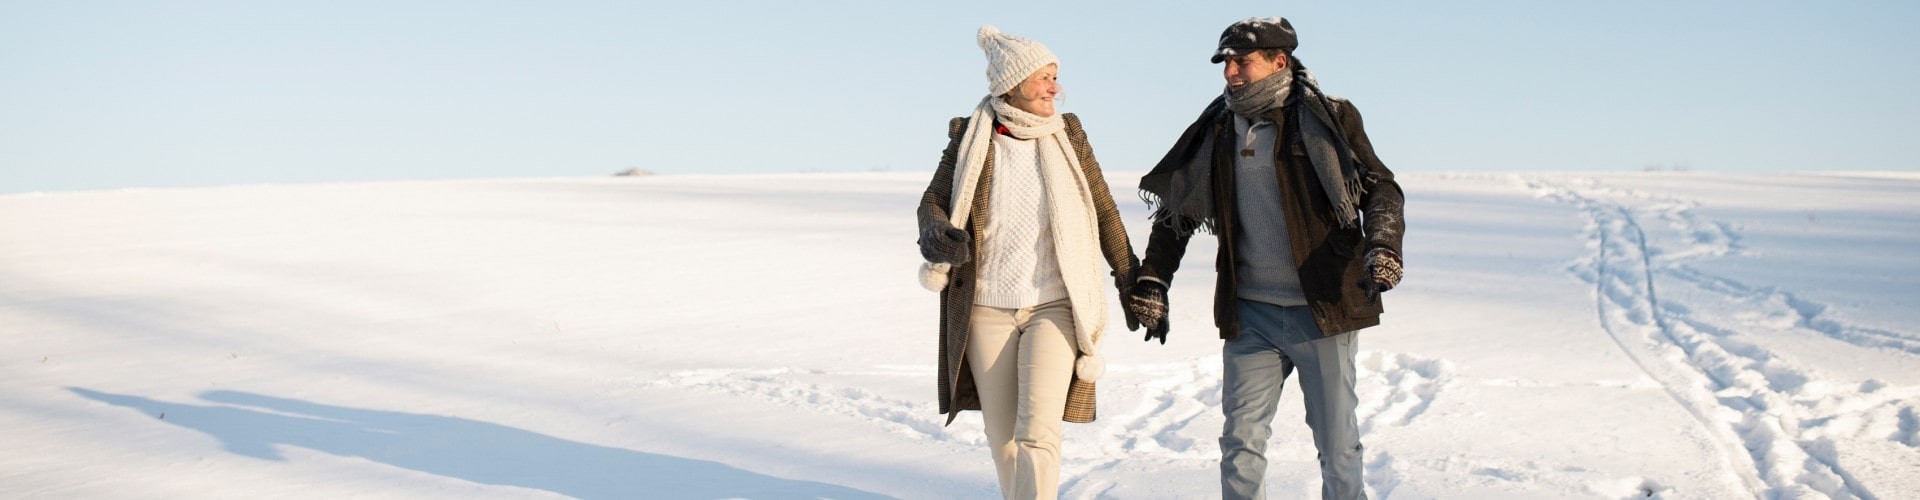 A reverse mortgage makes it possible for a senior couple to walk through the snow